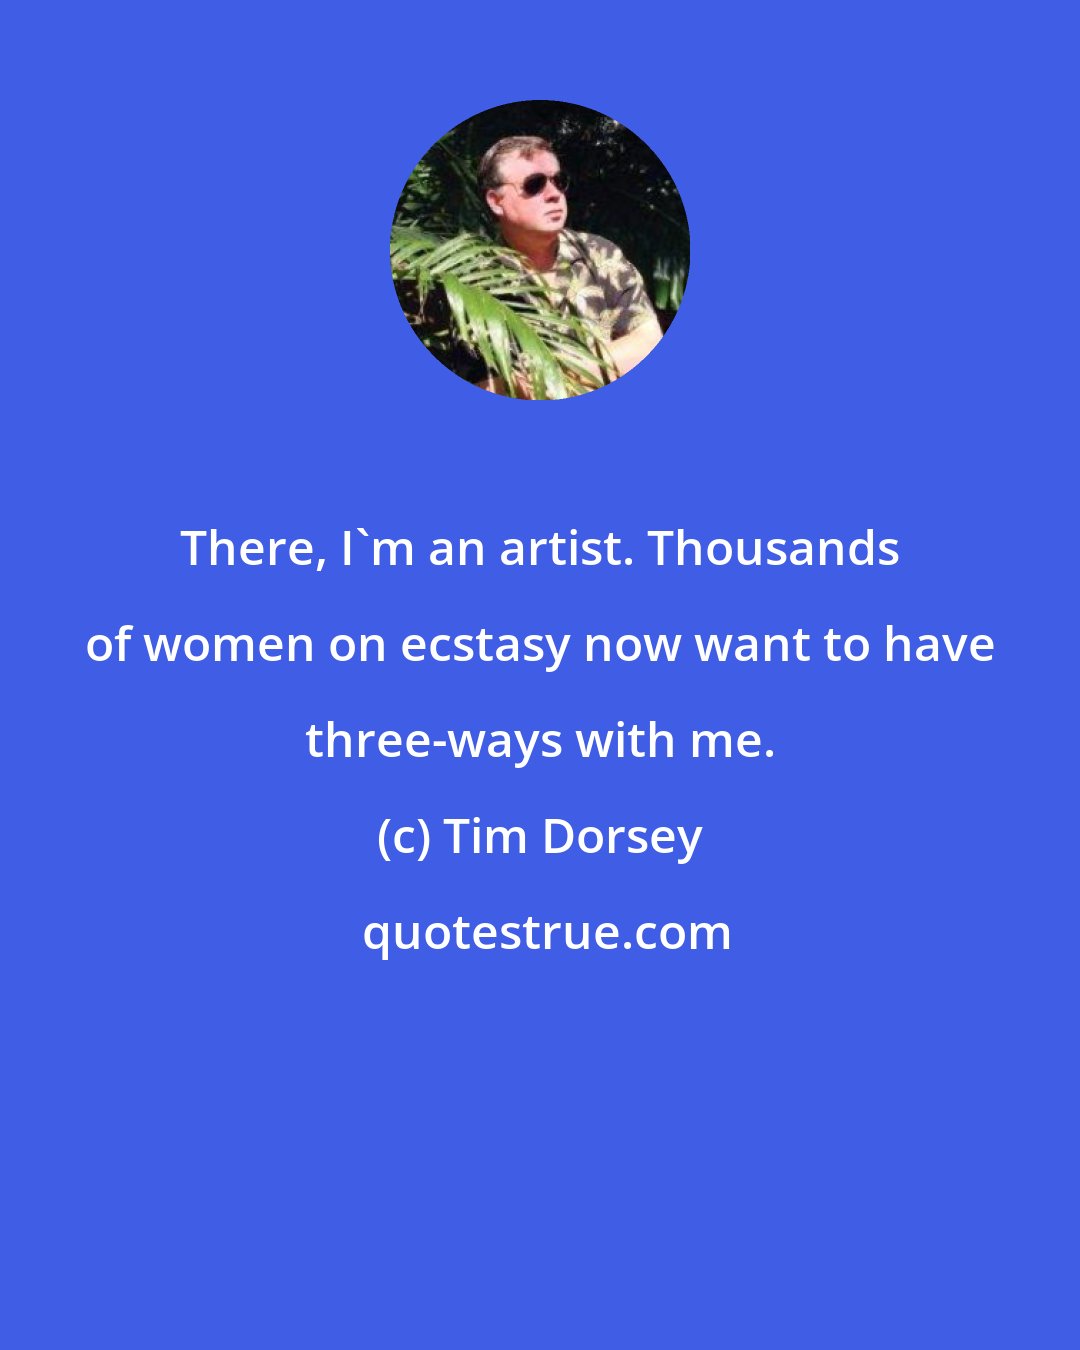 Tim Dorsey: There, I'm an artist. Thousands of women on ecstasy now want to have three-ways with me.